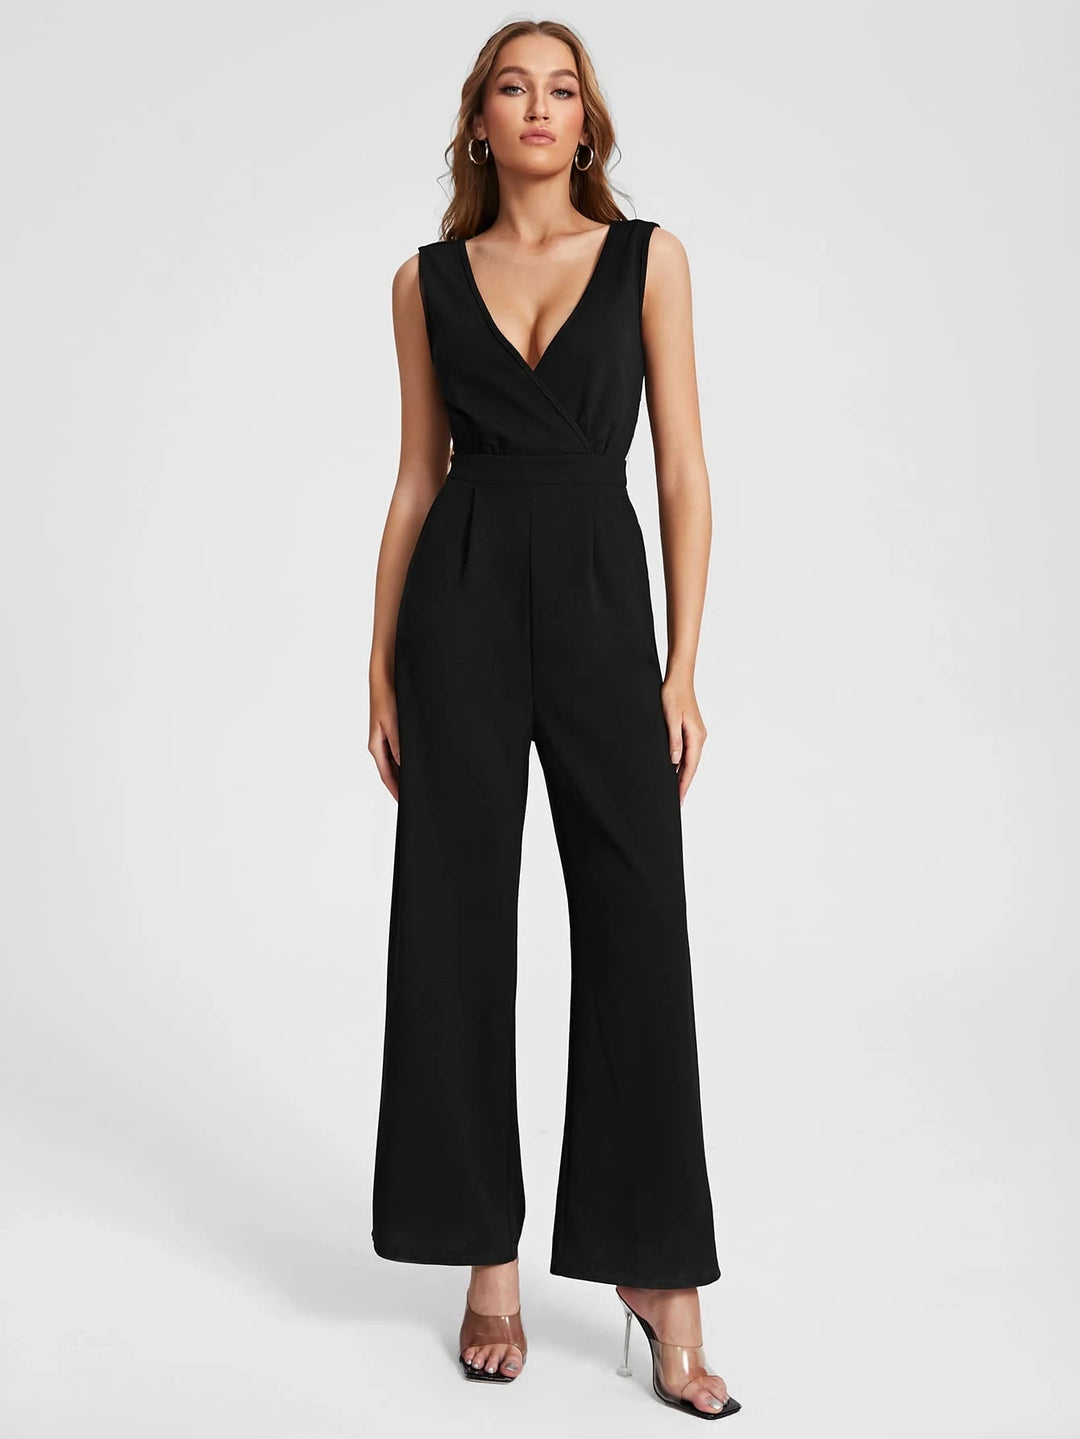 Contrast Laced Backless Jumpsuit